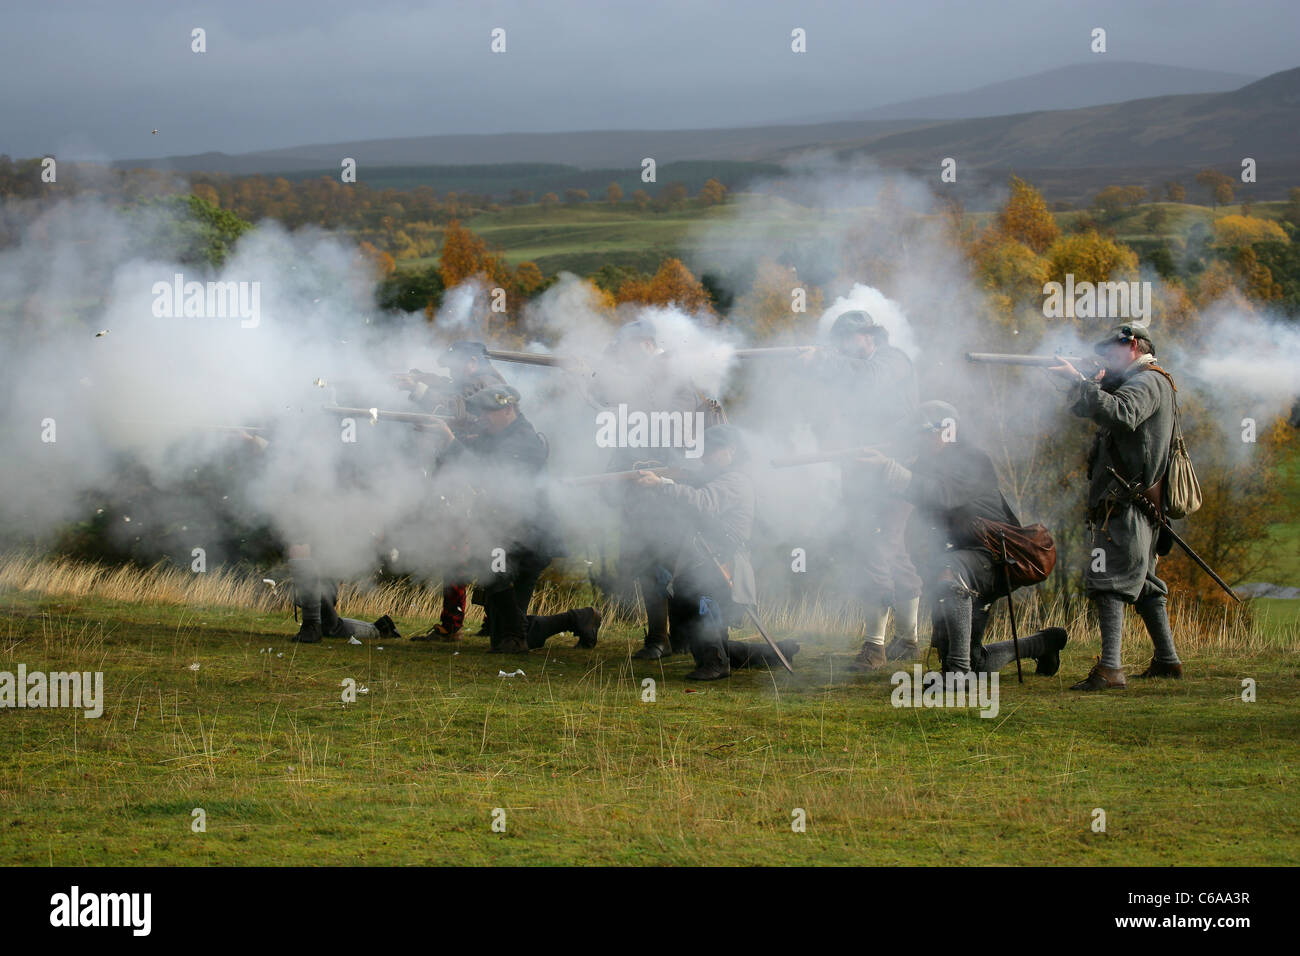 Members of [Fraser's Dragoons], a 17th century re-enactment society, obscured by the smoke from a volley of musket fire Stock Photo